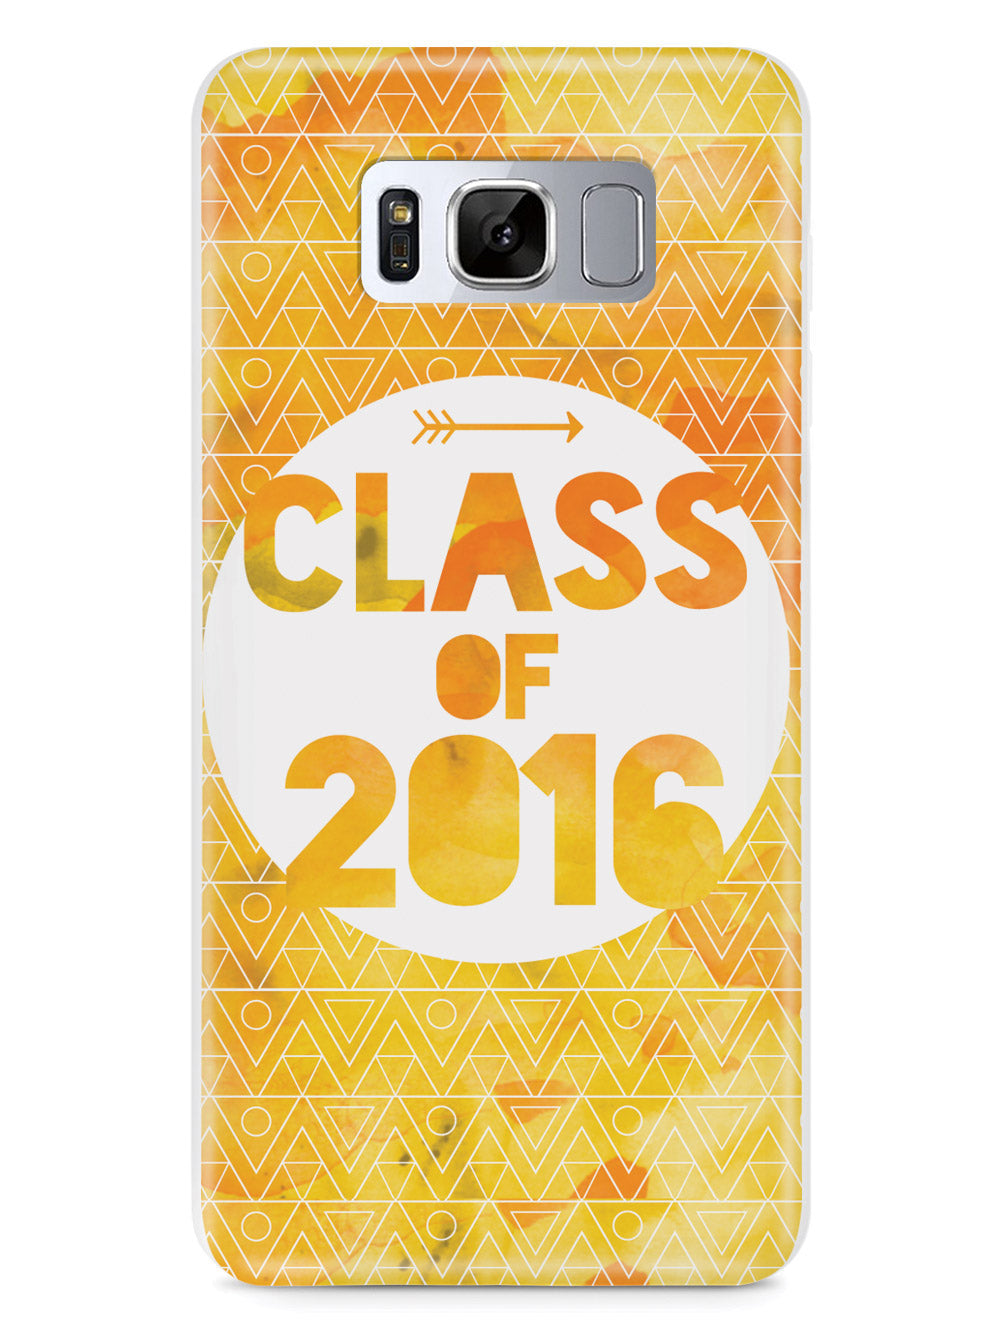 Class of 2016 - Yellow Watercolor Case